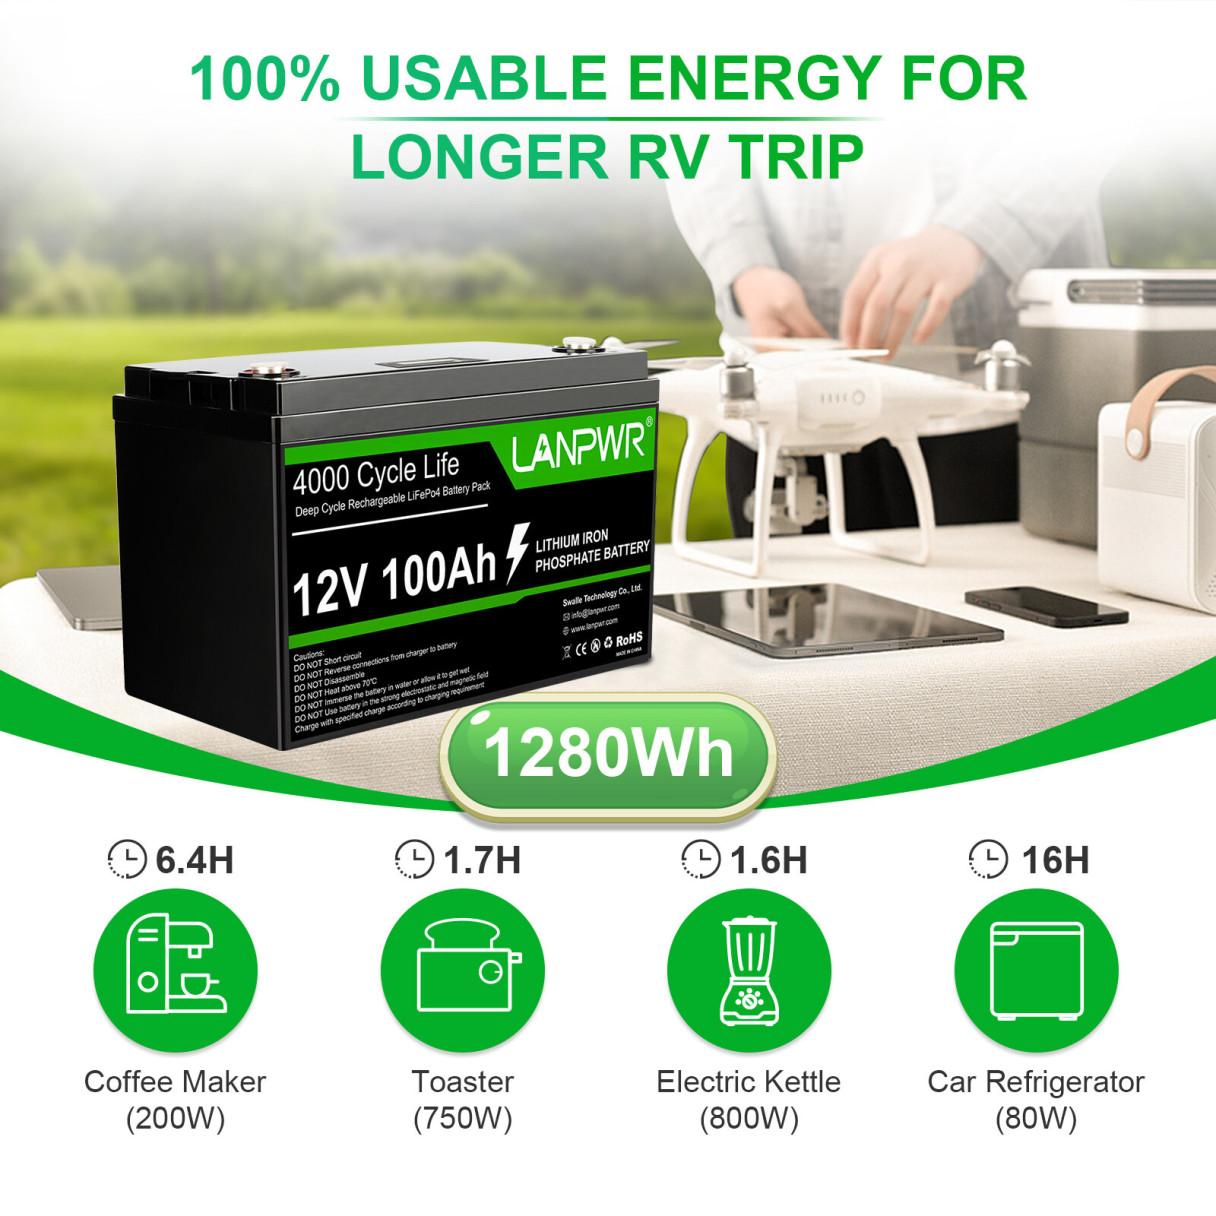 [EU Direct] LANPWR 12V 100Ah 1280W LiFePO4 Lithium Battery Pack Backup Power 1280Wh Energy 4000+ Deep Cycles Built-in 100A BMS 24.25lb Light Weight Support in Series Parallel for Replacing Most of Backup Power RV Boats Solar Trolling Motor Off-Grid